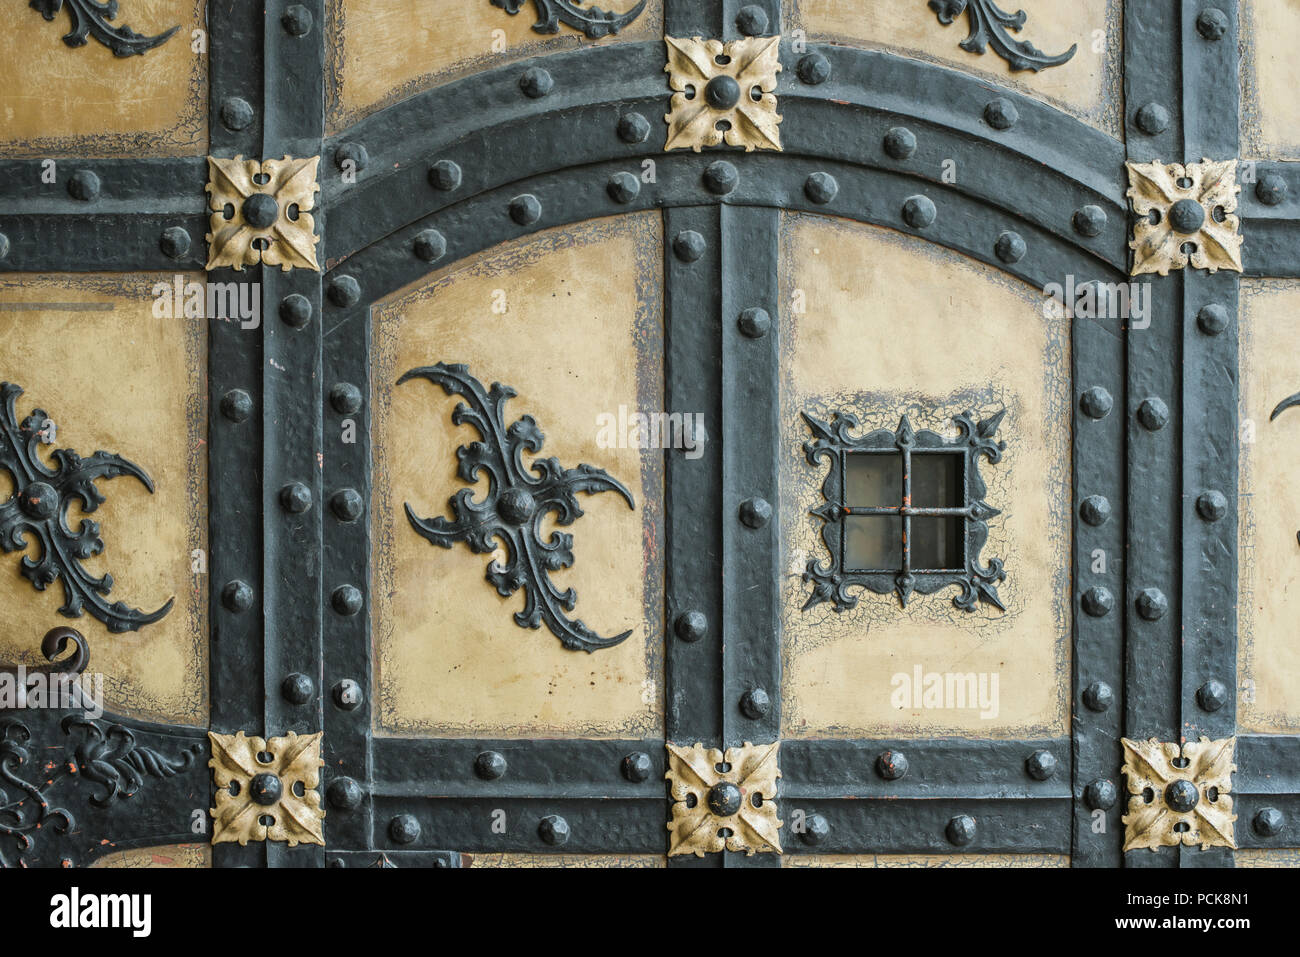 detailed fragment of ancient door decoration of famous Neues Rathaus (New City Hall) building in Munich, Germany Stock Photo